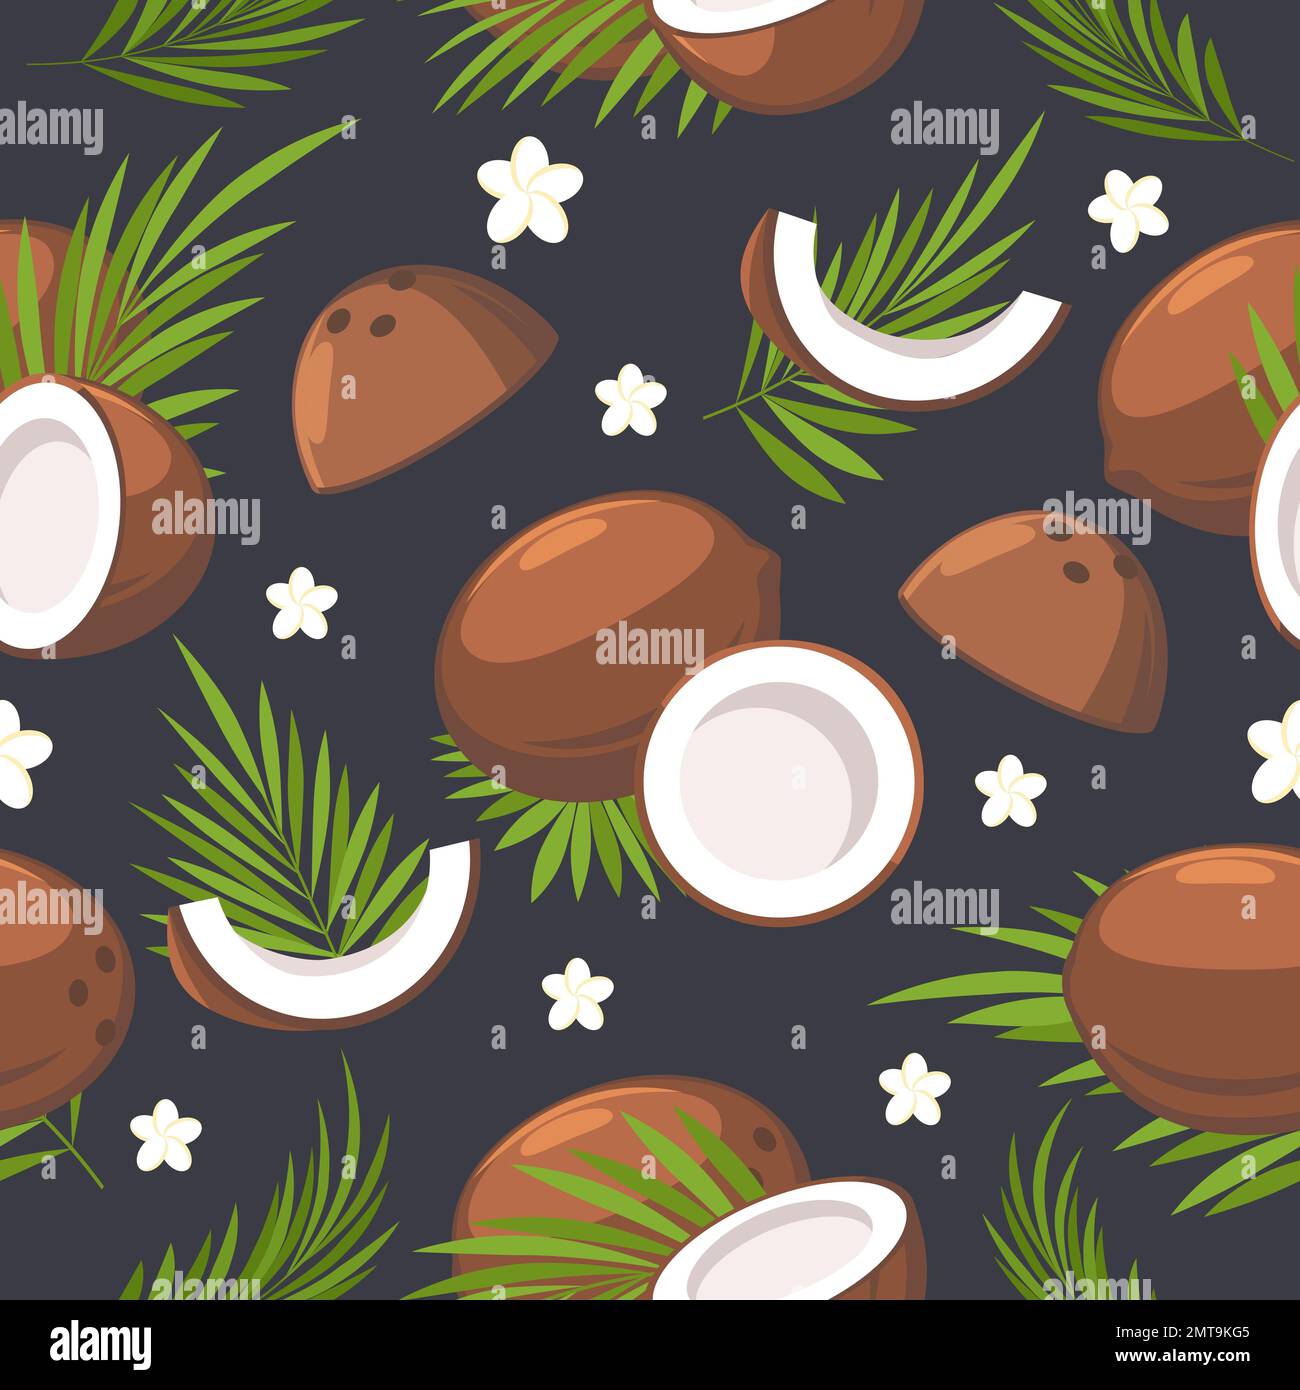 Coconuts seamless pattern Stock Vector